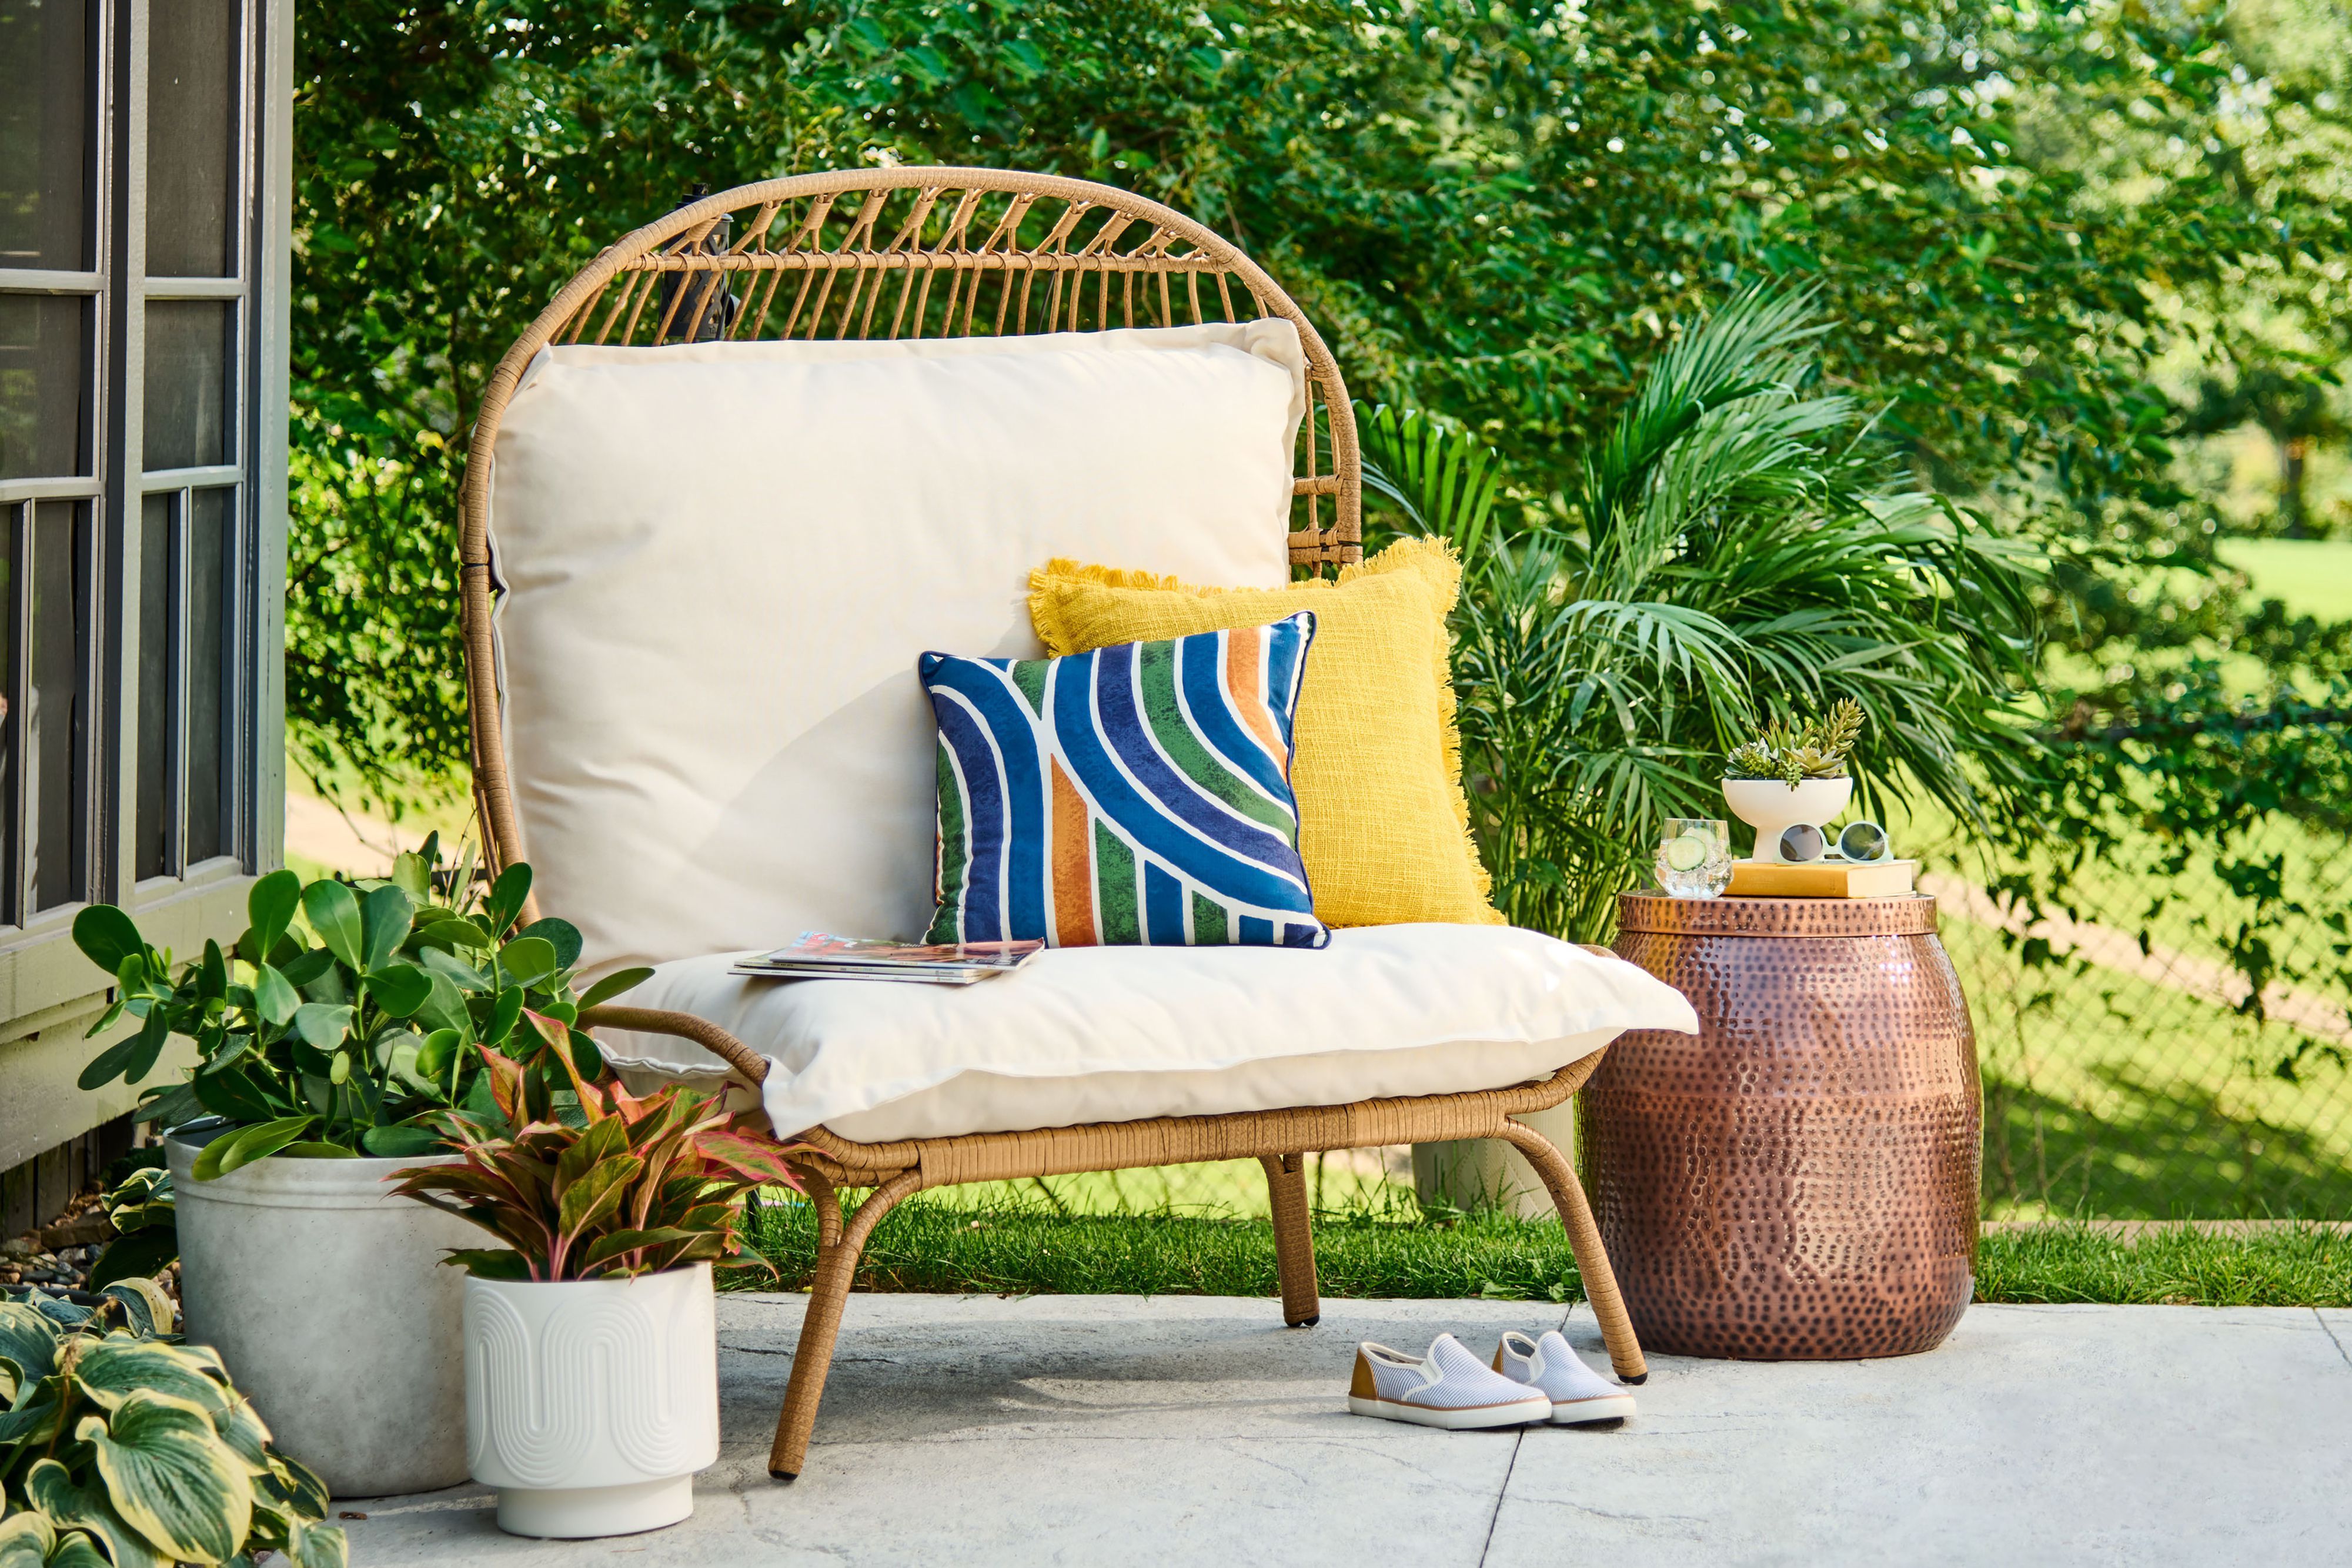 We Just Launched A Brand New Patio Collection—here Are 7 Trends To Borrow Intended For All Weather Wicker Outdoor Cuddle Chair And Ottoman Set (View 8 of 15)